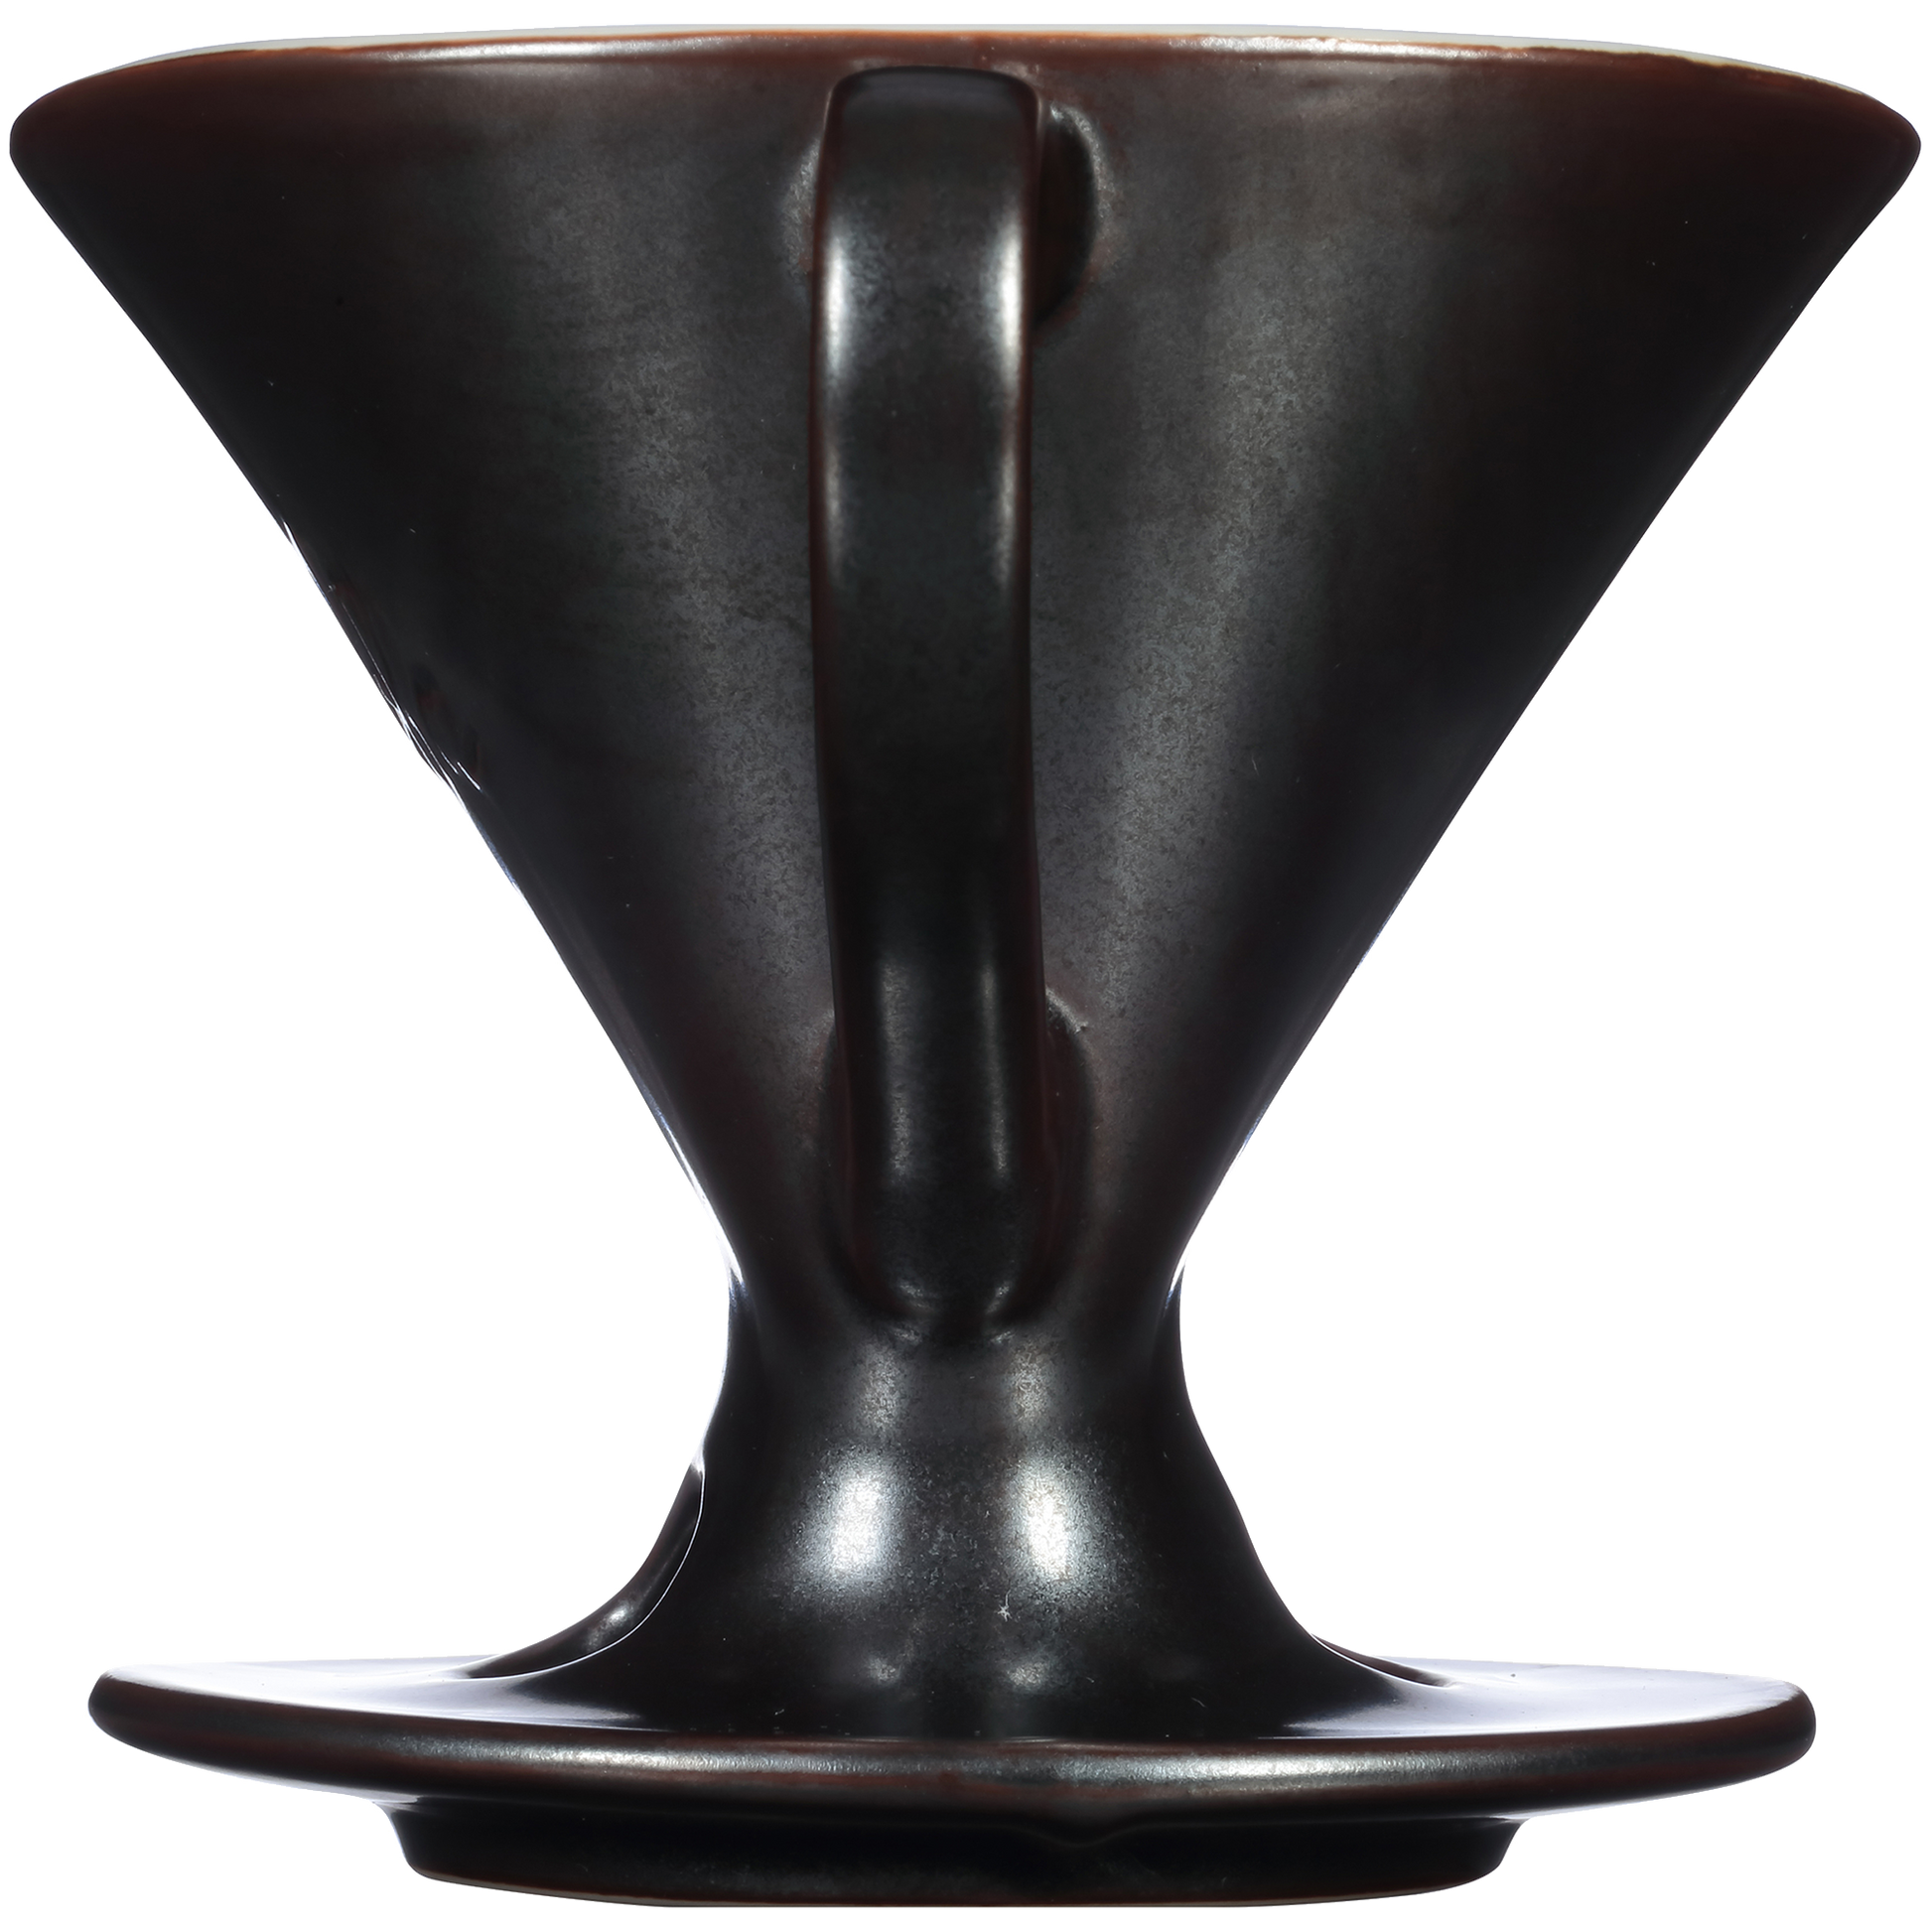 Melitta Pour Over Copper Drip Coffee Gift Porcelain Single Cup